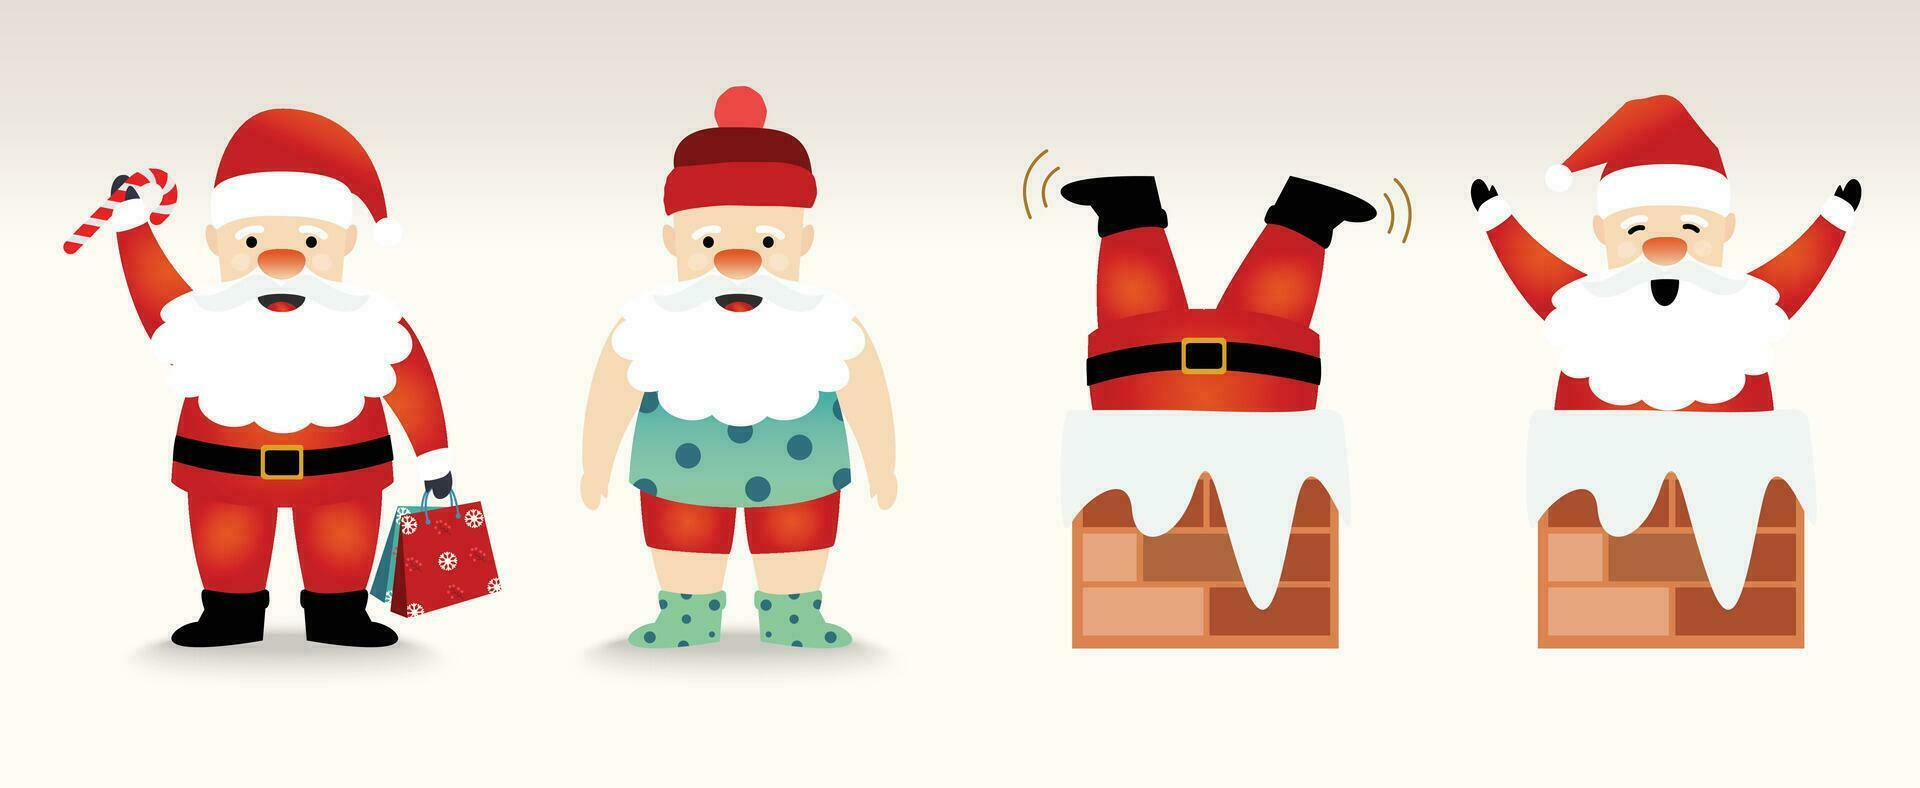 Set of cute Santa Claus. The act of Santa with candy and present bags, Santa stuck with chimney, Vector illustration. For new year cards, banners, headers, posters.